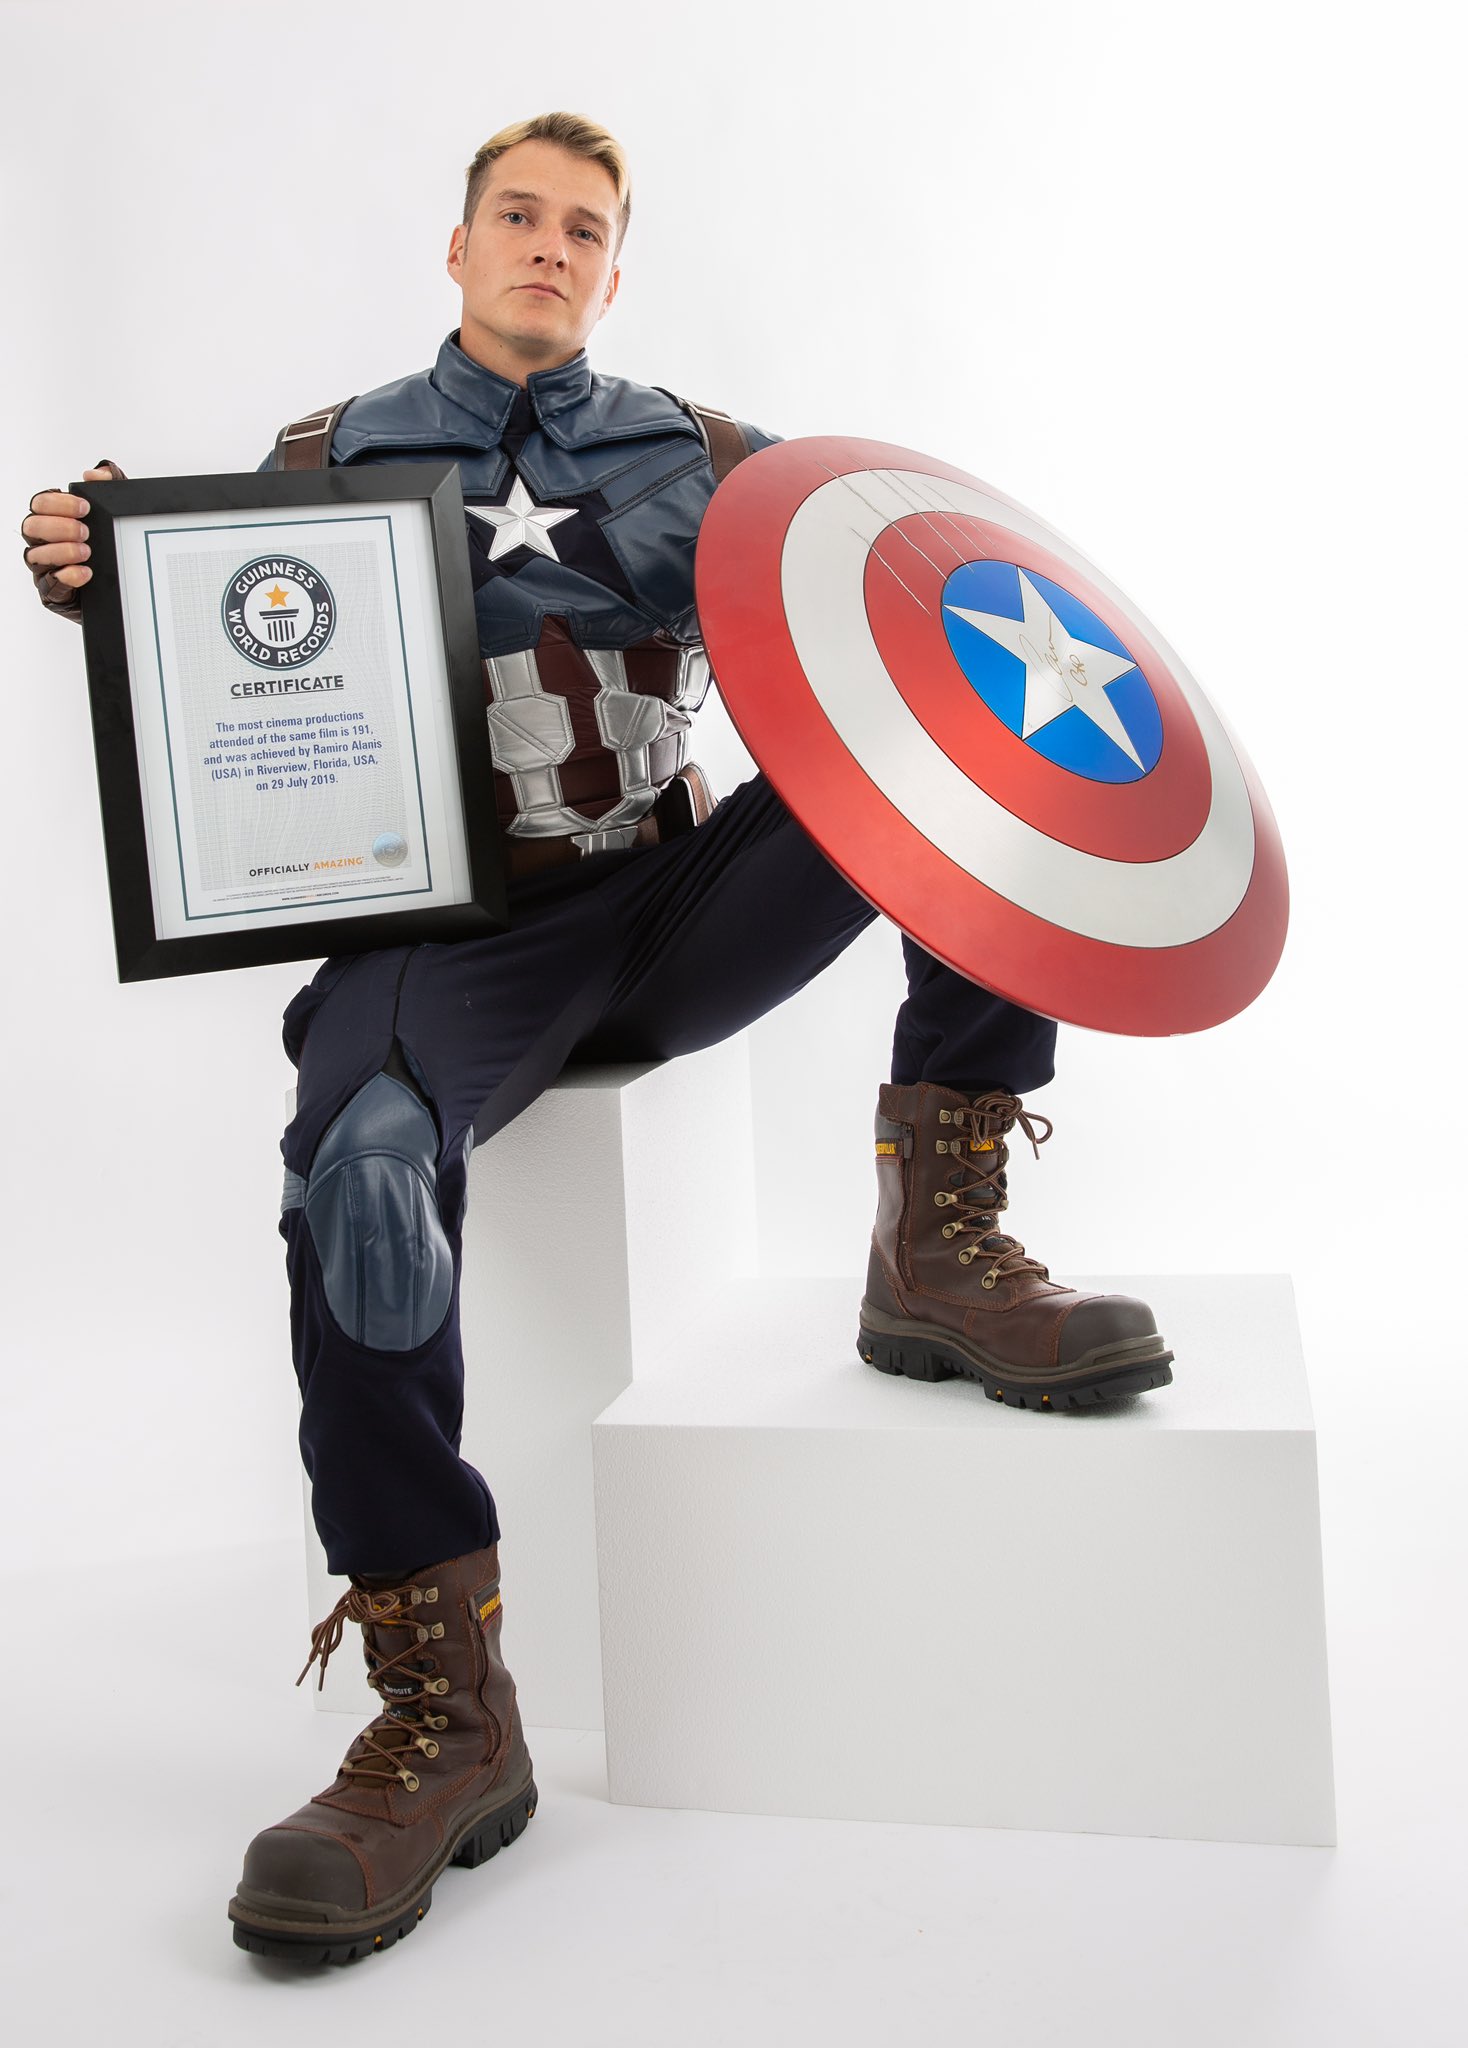 El Tigre Vengador on Twitter: "Yeah This is My name Ramiro Agustin Alanis, the one and Only Guinness World Record record Holder for the Most Cinema Productions attended - Same Film. 191